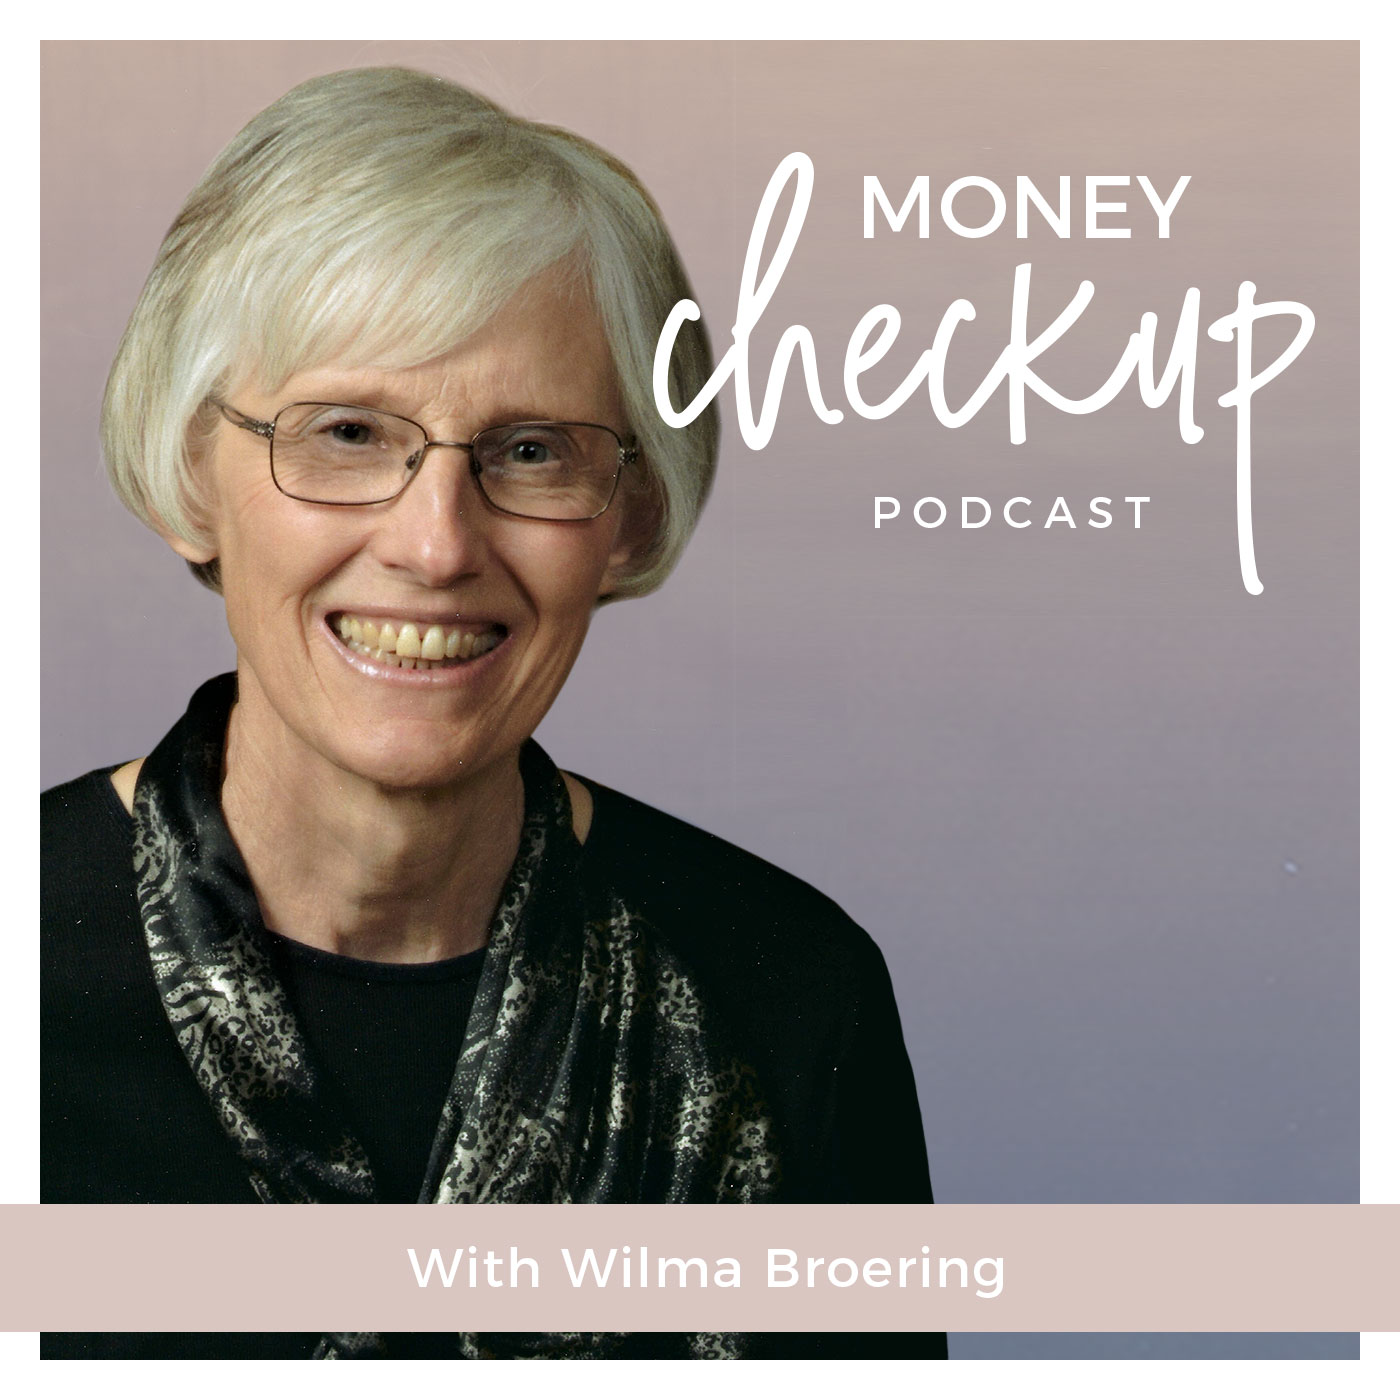 Money Checkup Podcast With Wilma Broering